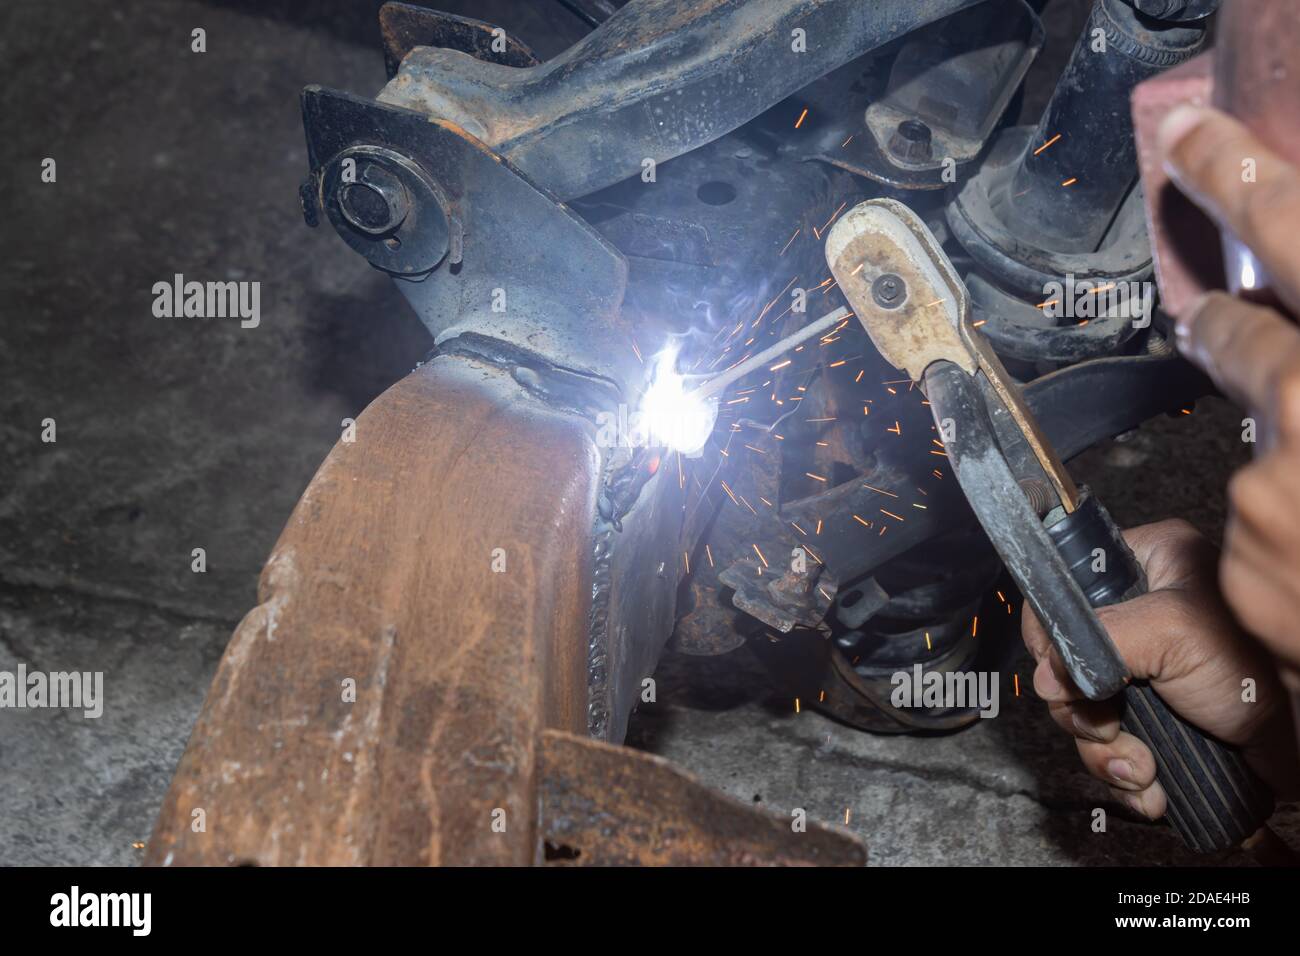 Welder Welding Bottom Car Chassis by Electric Welding Torch at Side View Stock Photo